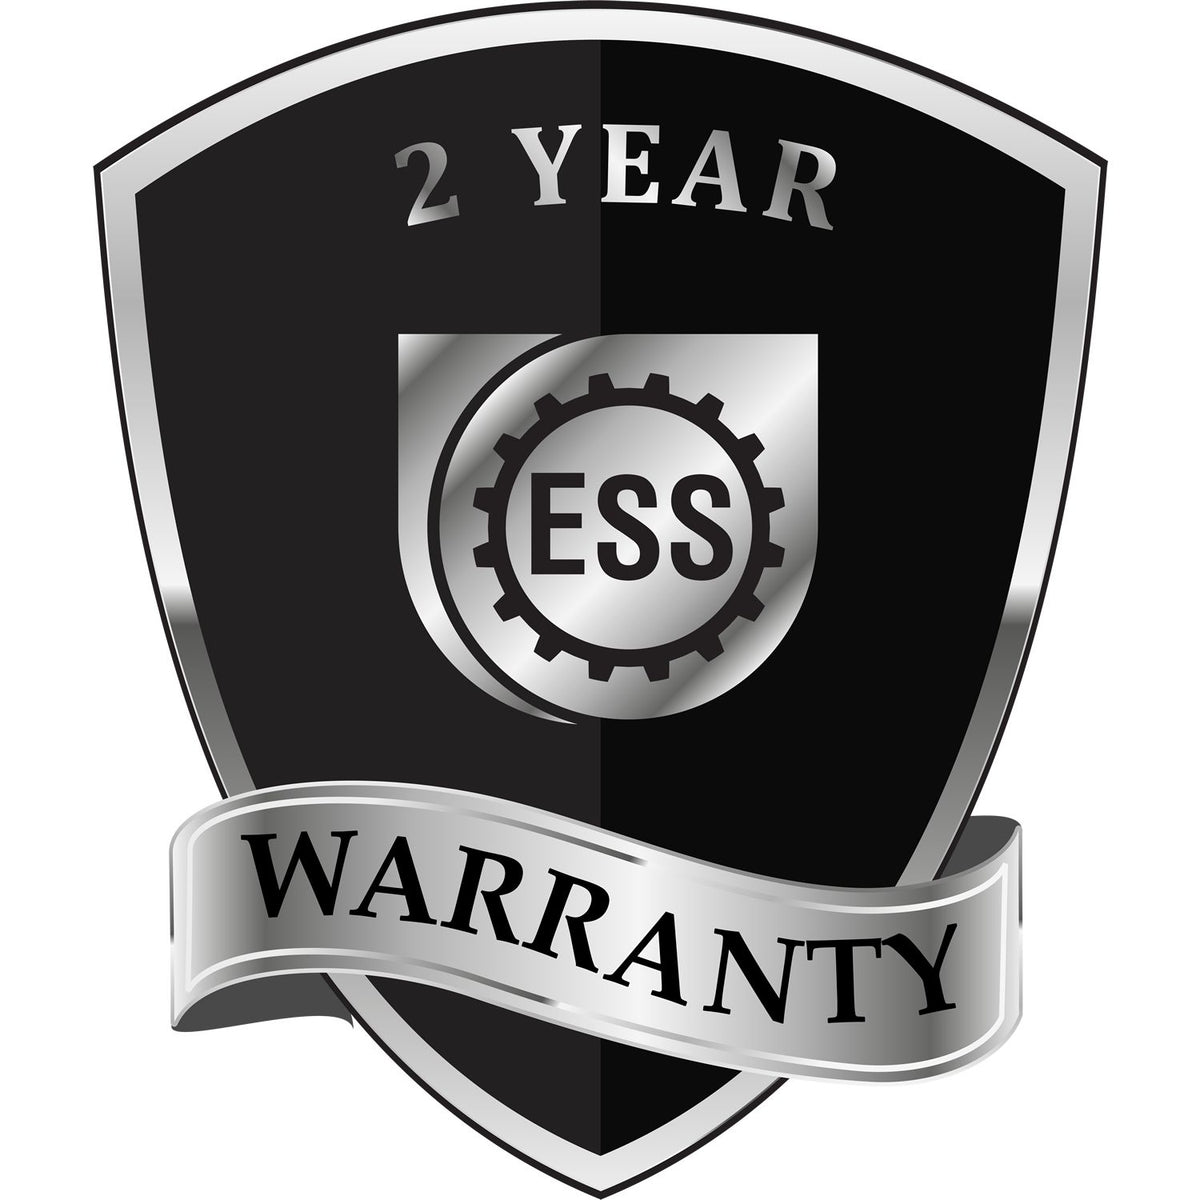 A black and silver badge or emblem showing warranty information for the Hybrid Texas Landscape Architect Seal